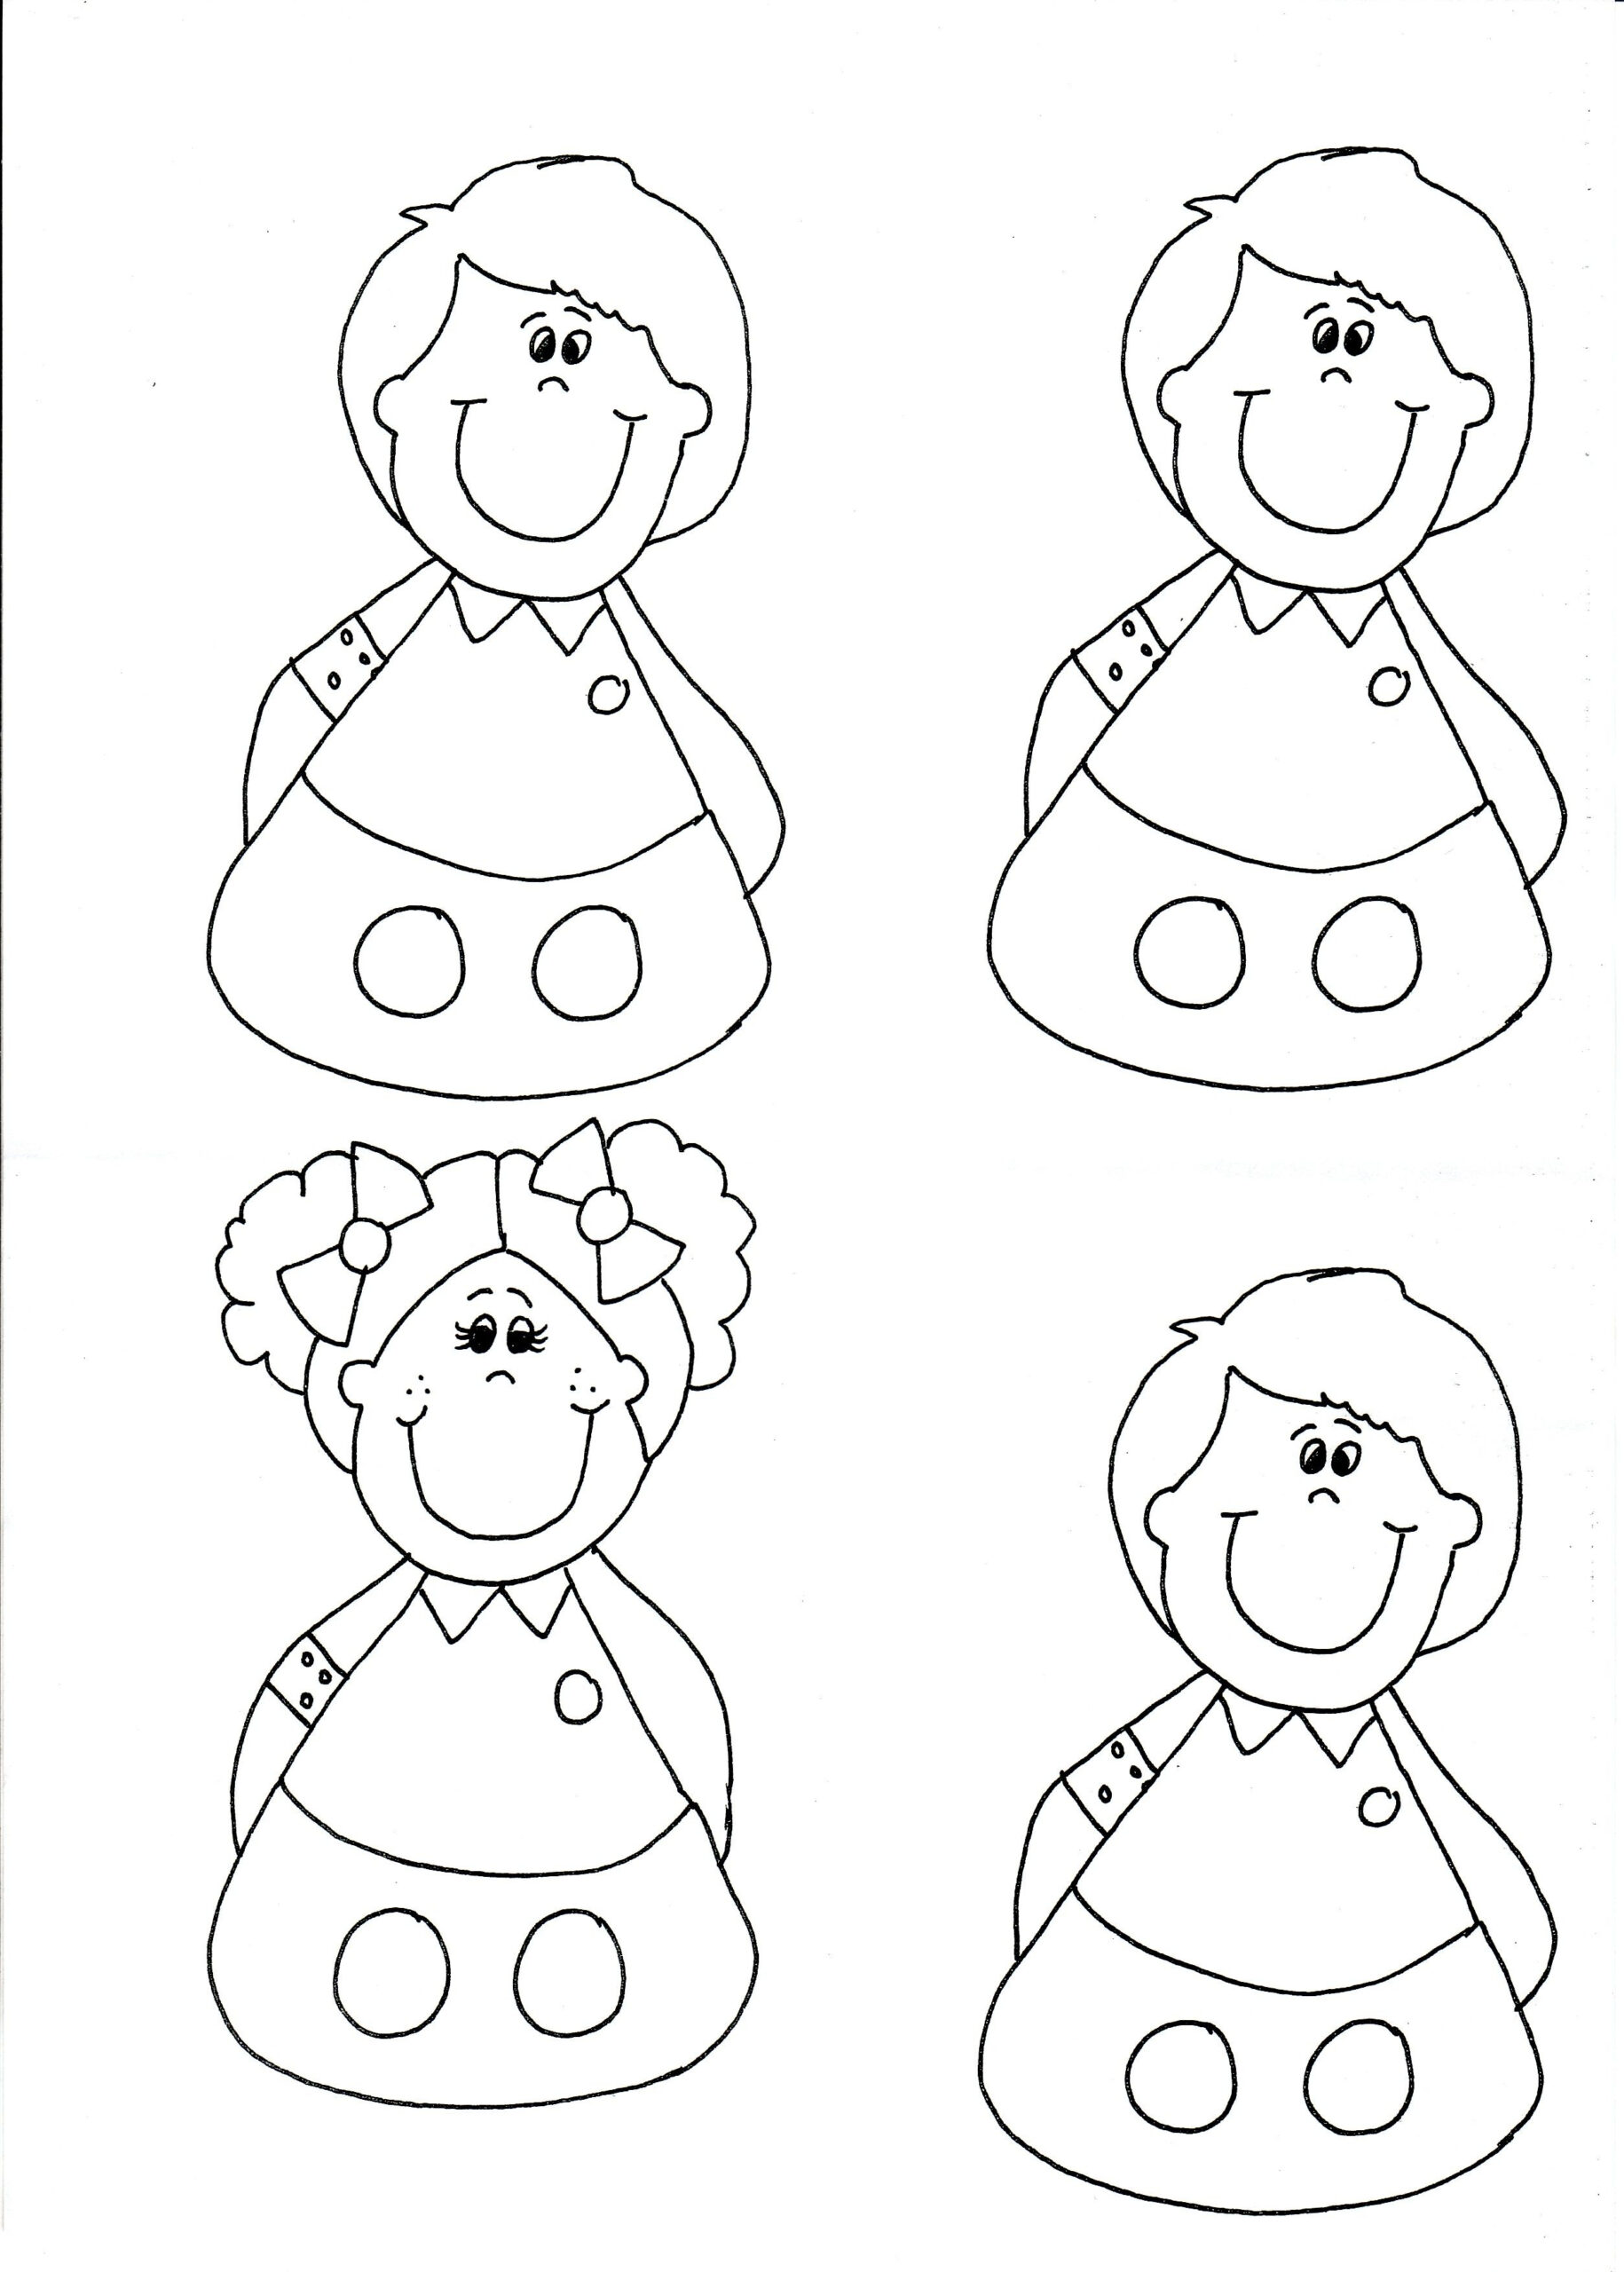 Here Is A Template For Finger Puppets For Anchors Description From 